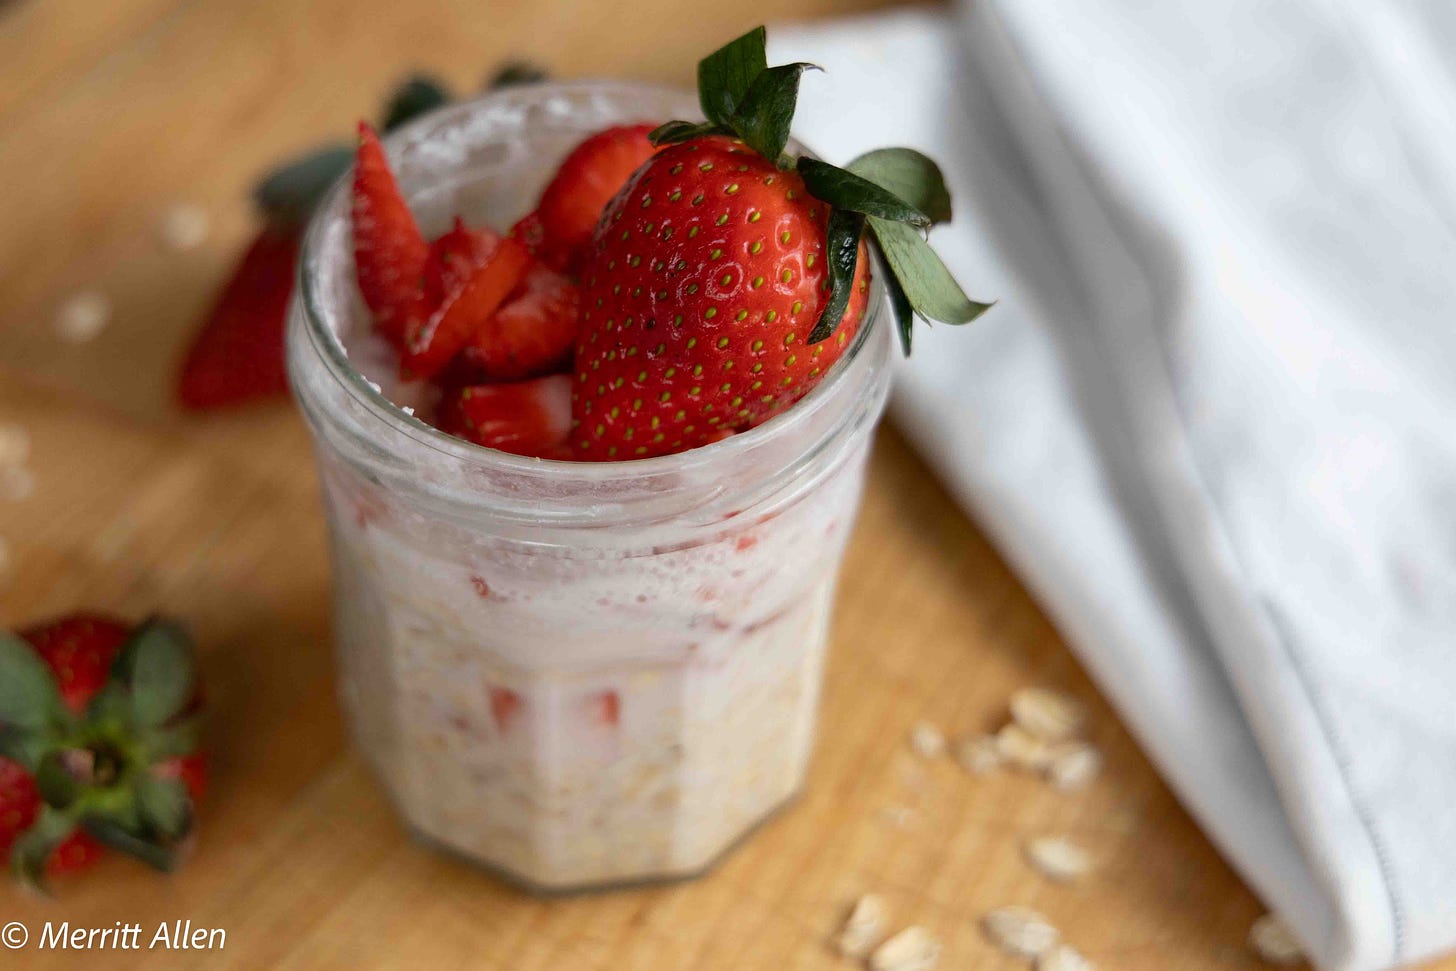 strawberries and cream overnight oats